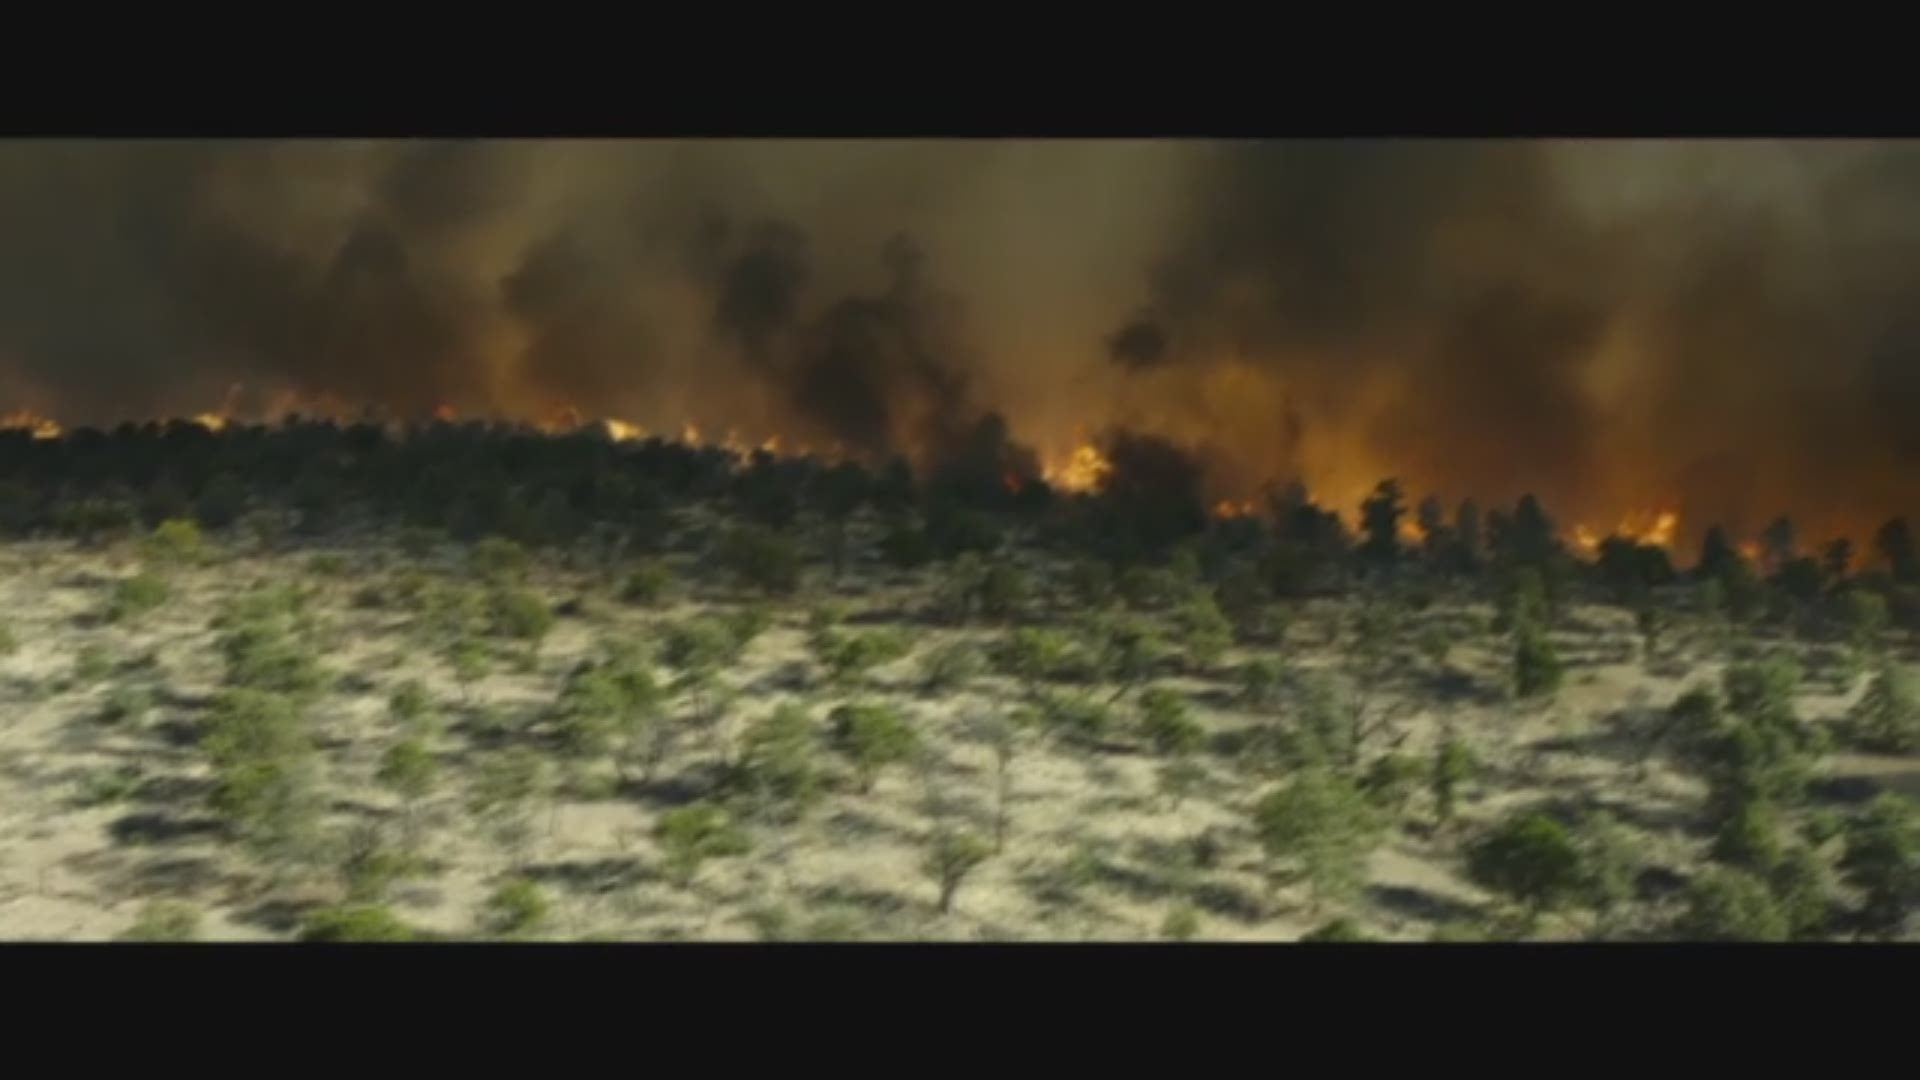 A new trailer was released for the upcoming movie "Only the Brave," based on the story of the Granite Mountain Hotshots. Nineteen firefighters died near Yarnell, Arizona, in 2013.